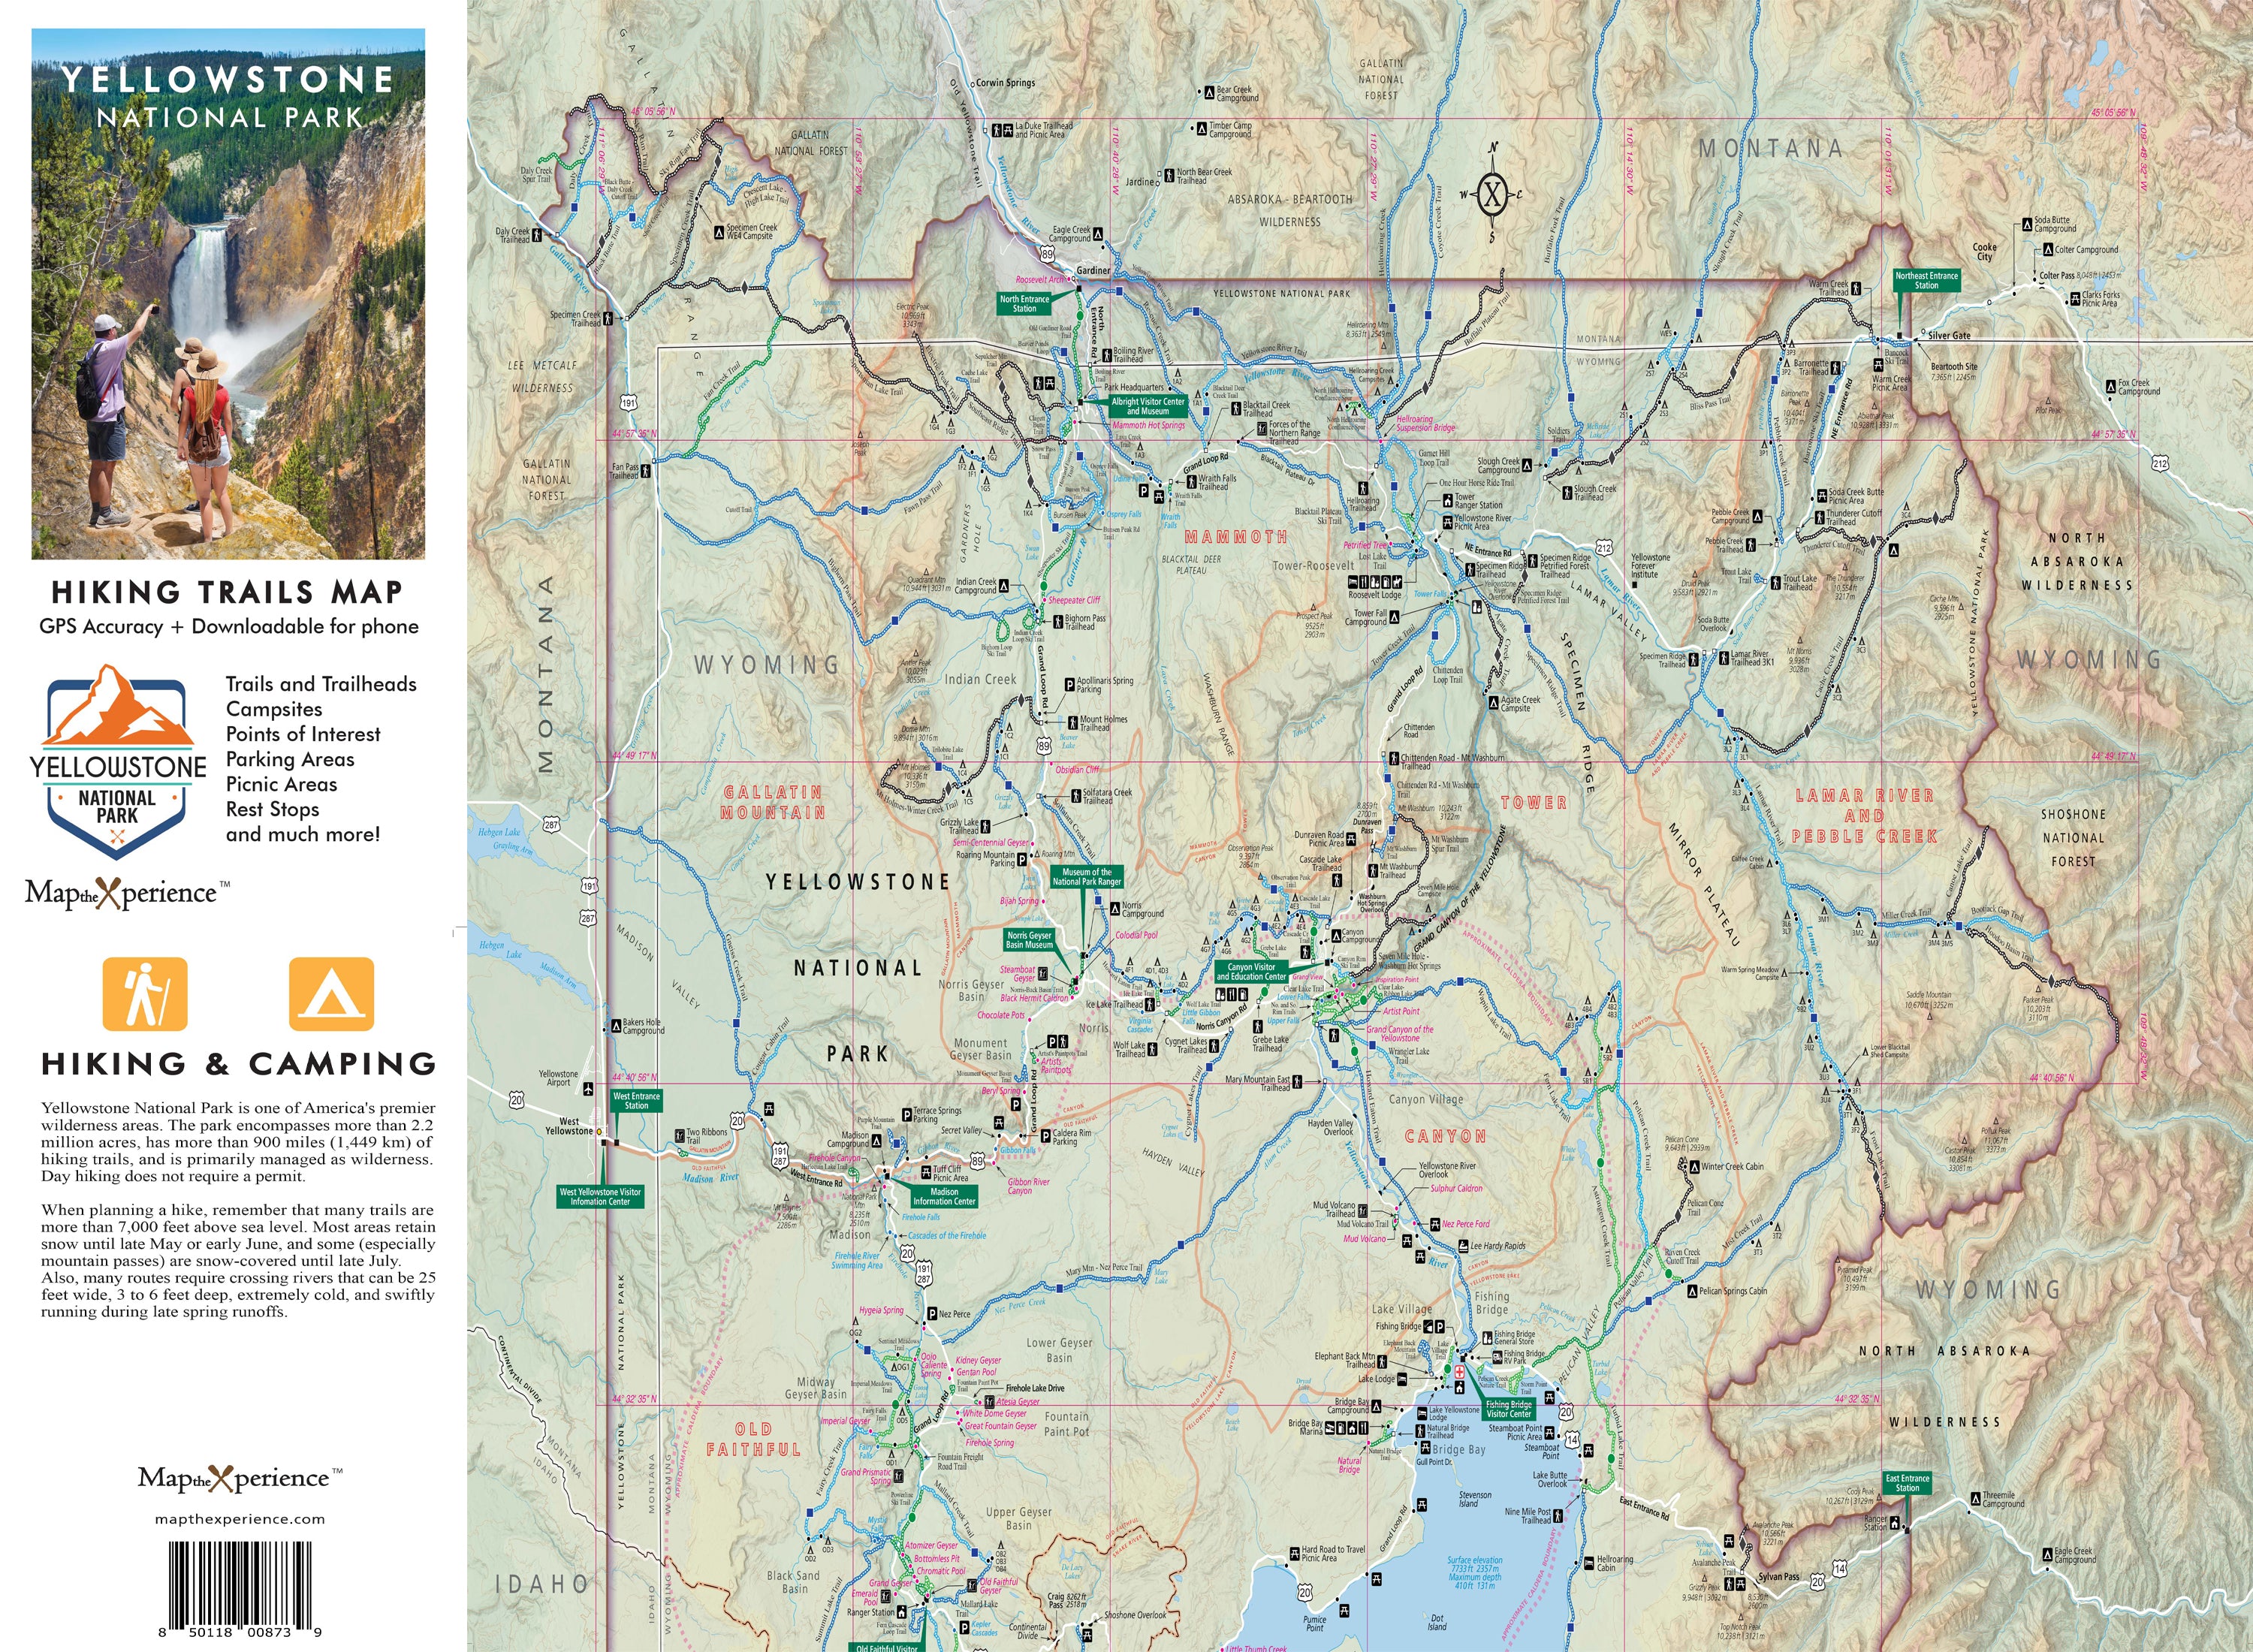 Yellowstone National Park Hiking Trails Map